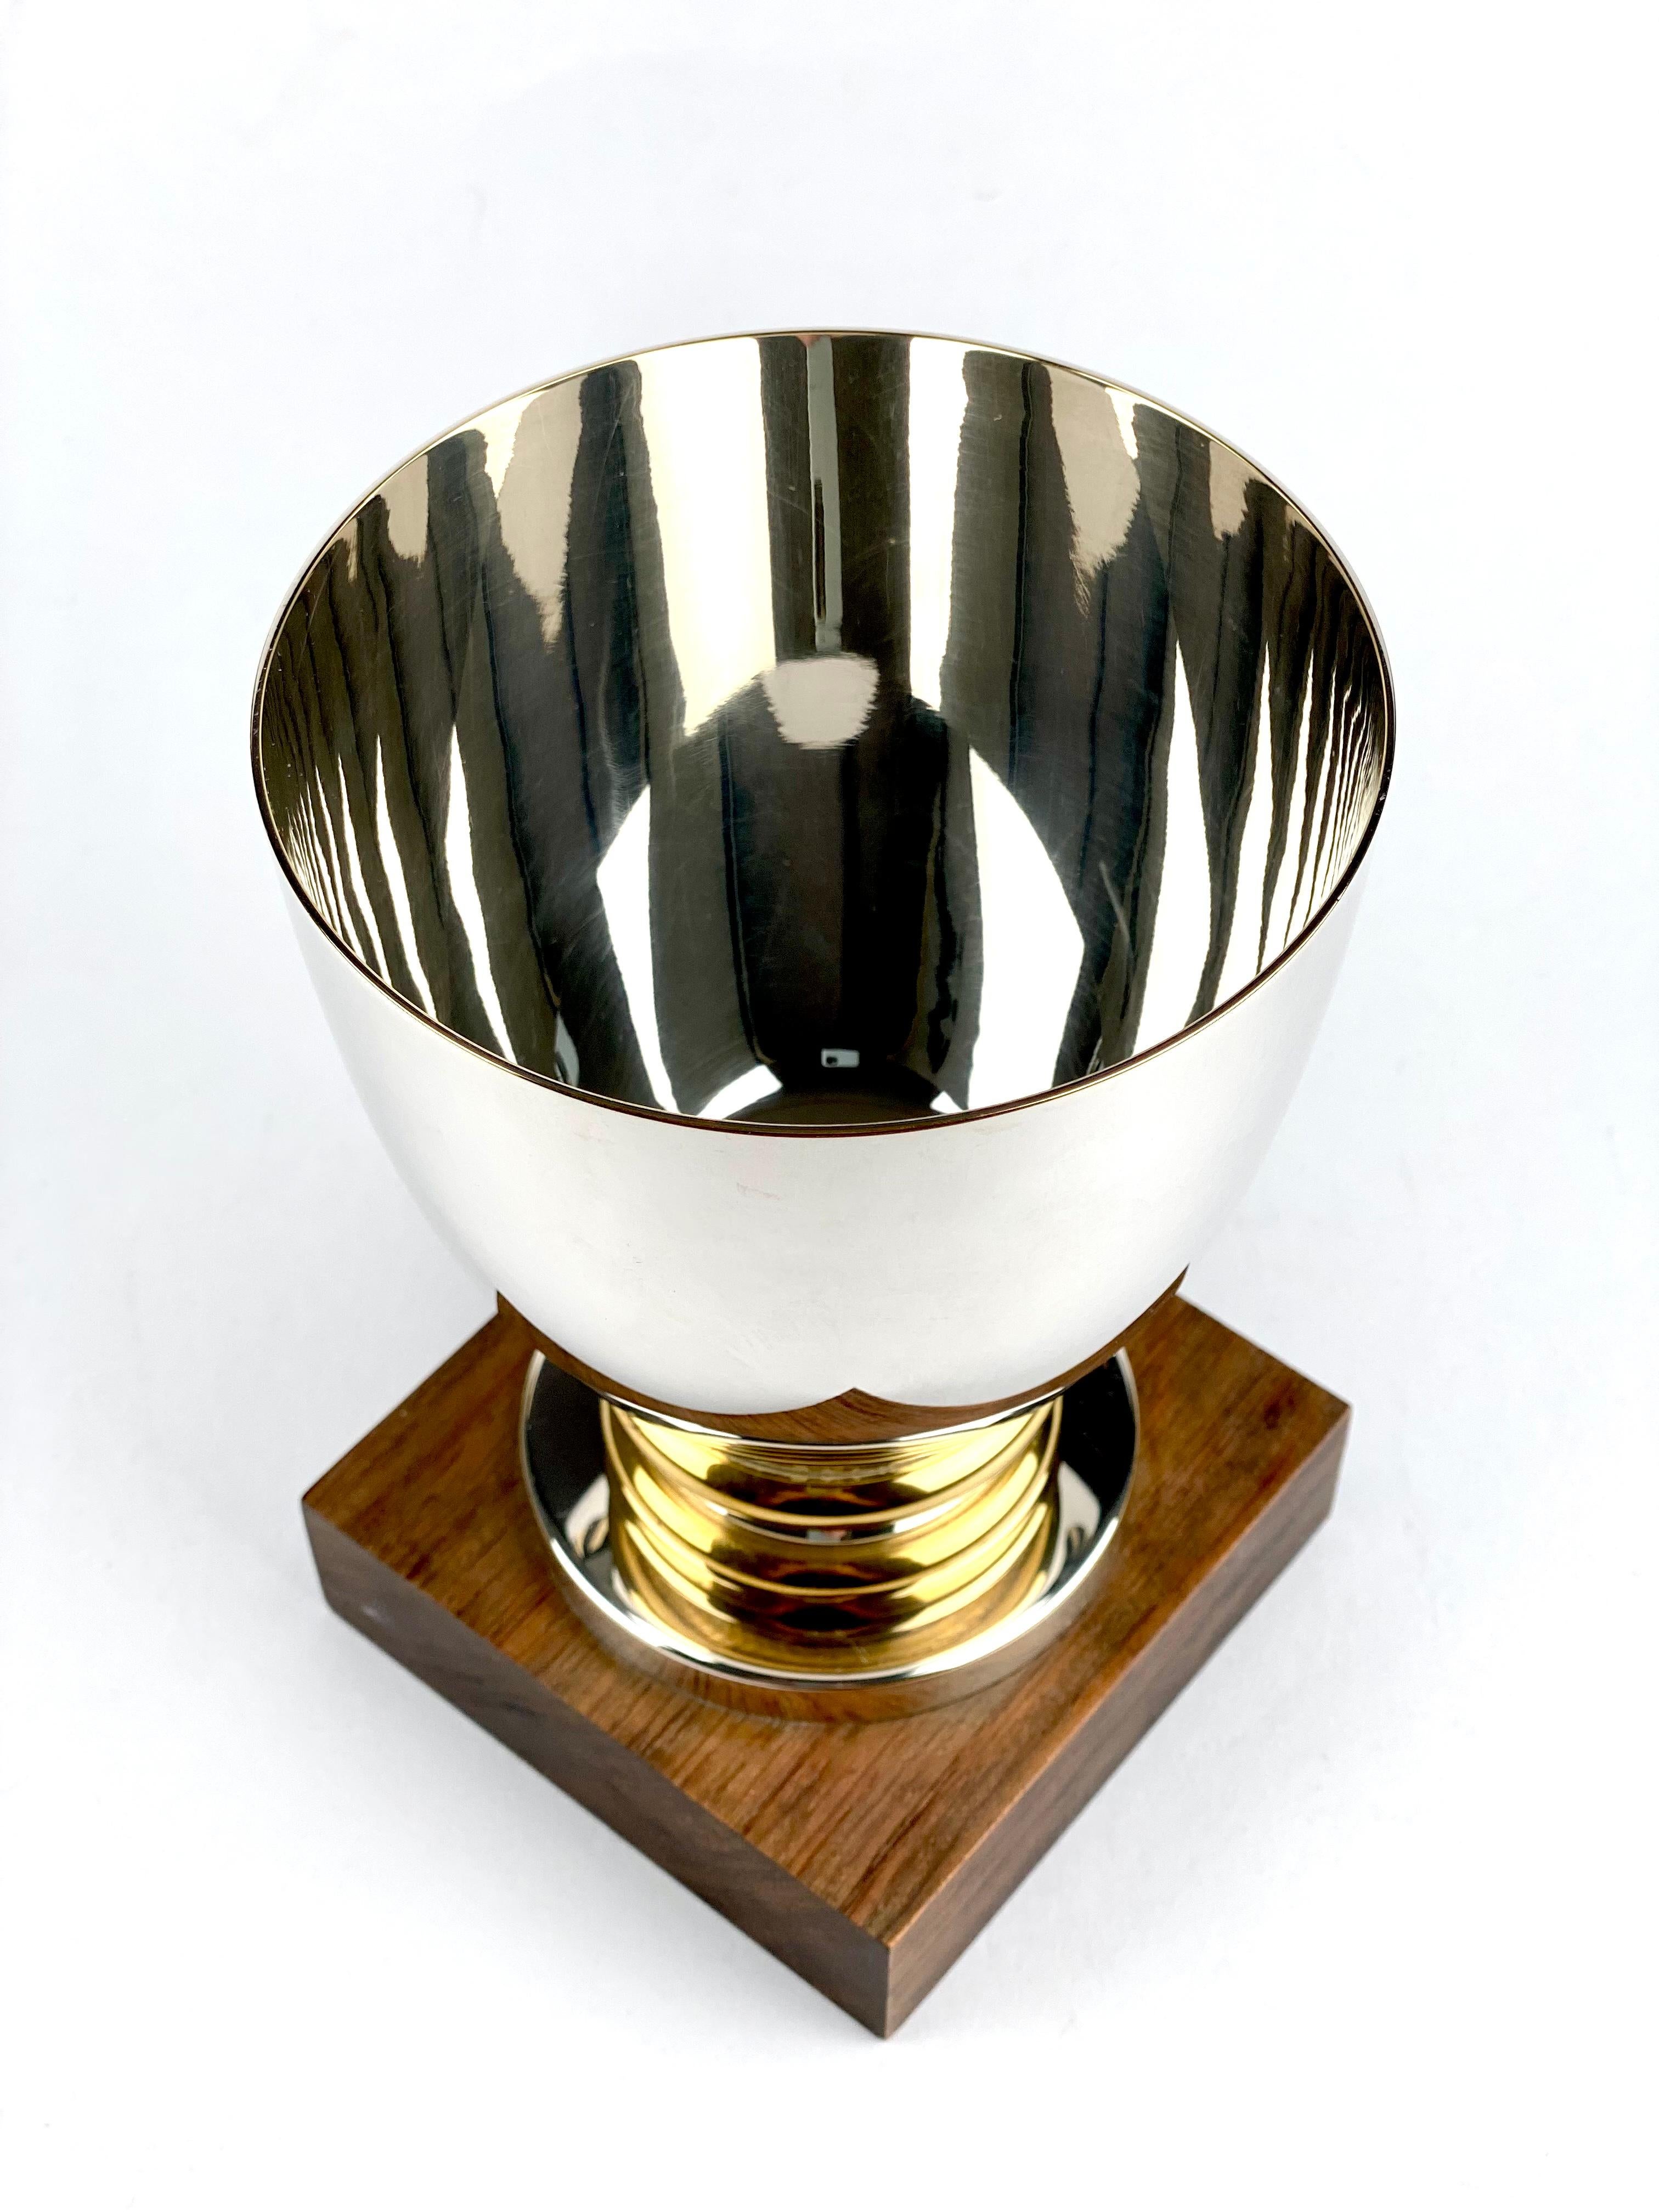 A Magnificent Art Deco silver plated Puiforcat vase


Hallmarked with Puiforcat France and their EP mark

Weight including hardwood base 1227 grams 
Height 17.5 cm
Diameter of the top 12 cm 

This design is achieved thanks to the fine